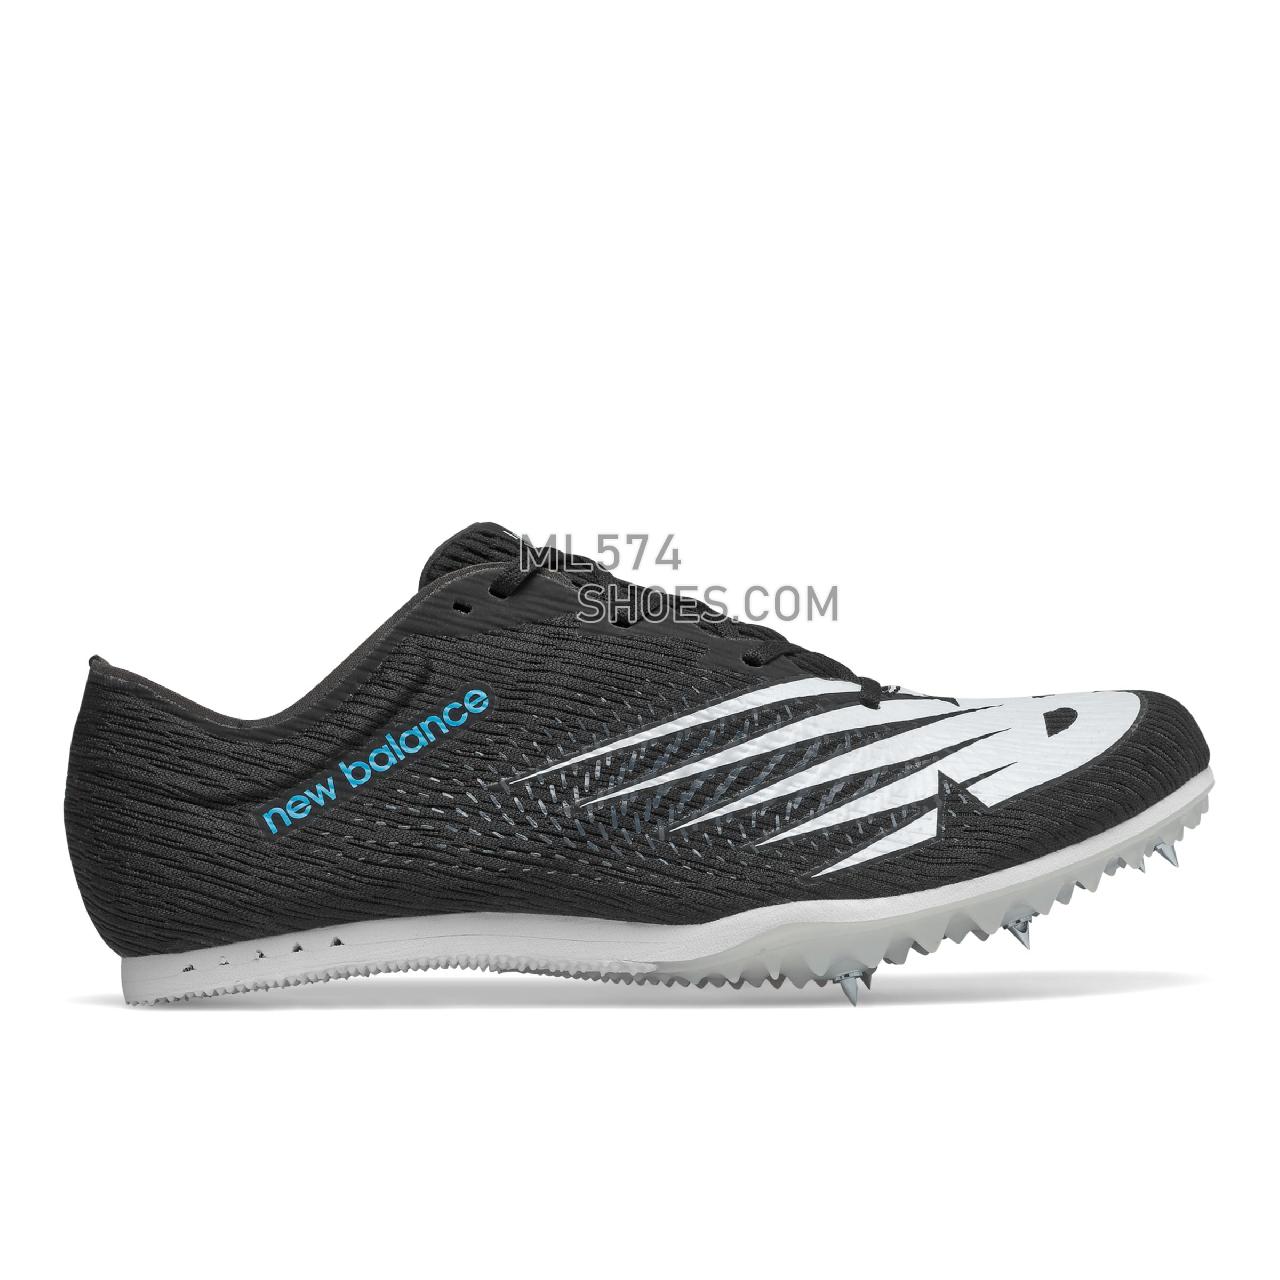 New Balance MD500v7 - Men's Competition Running - Black with White - MMD500X7